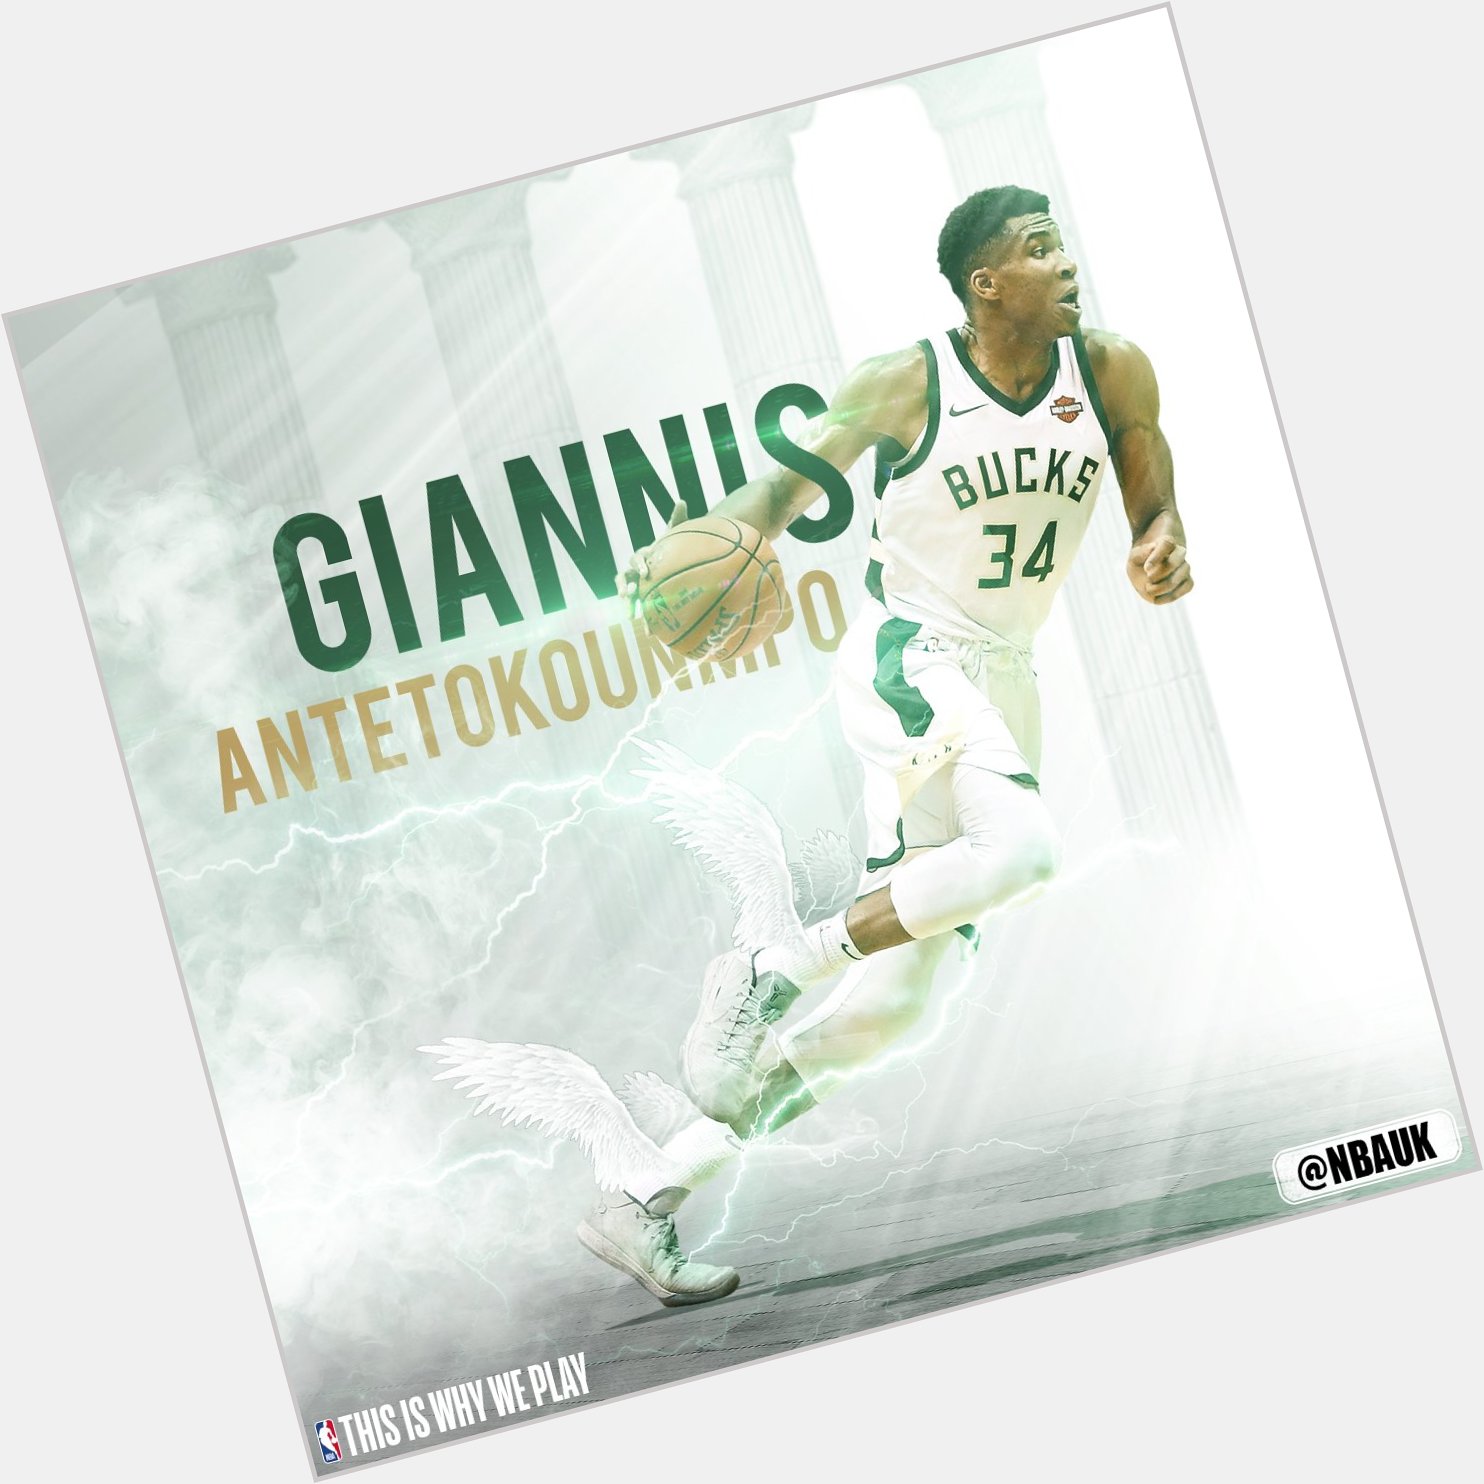   Join us as we wish the on and only \Greek Freak\ Giannis Antetokounmpo a very happy birthday!   